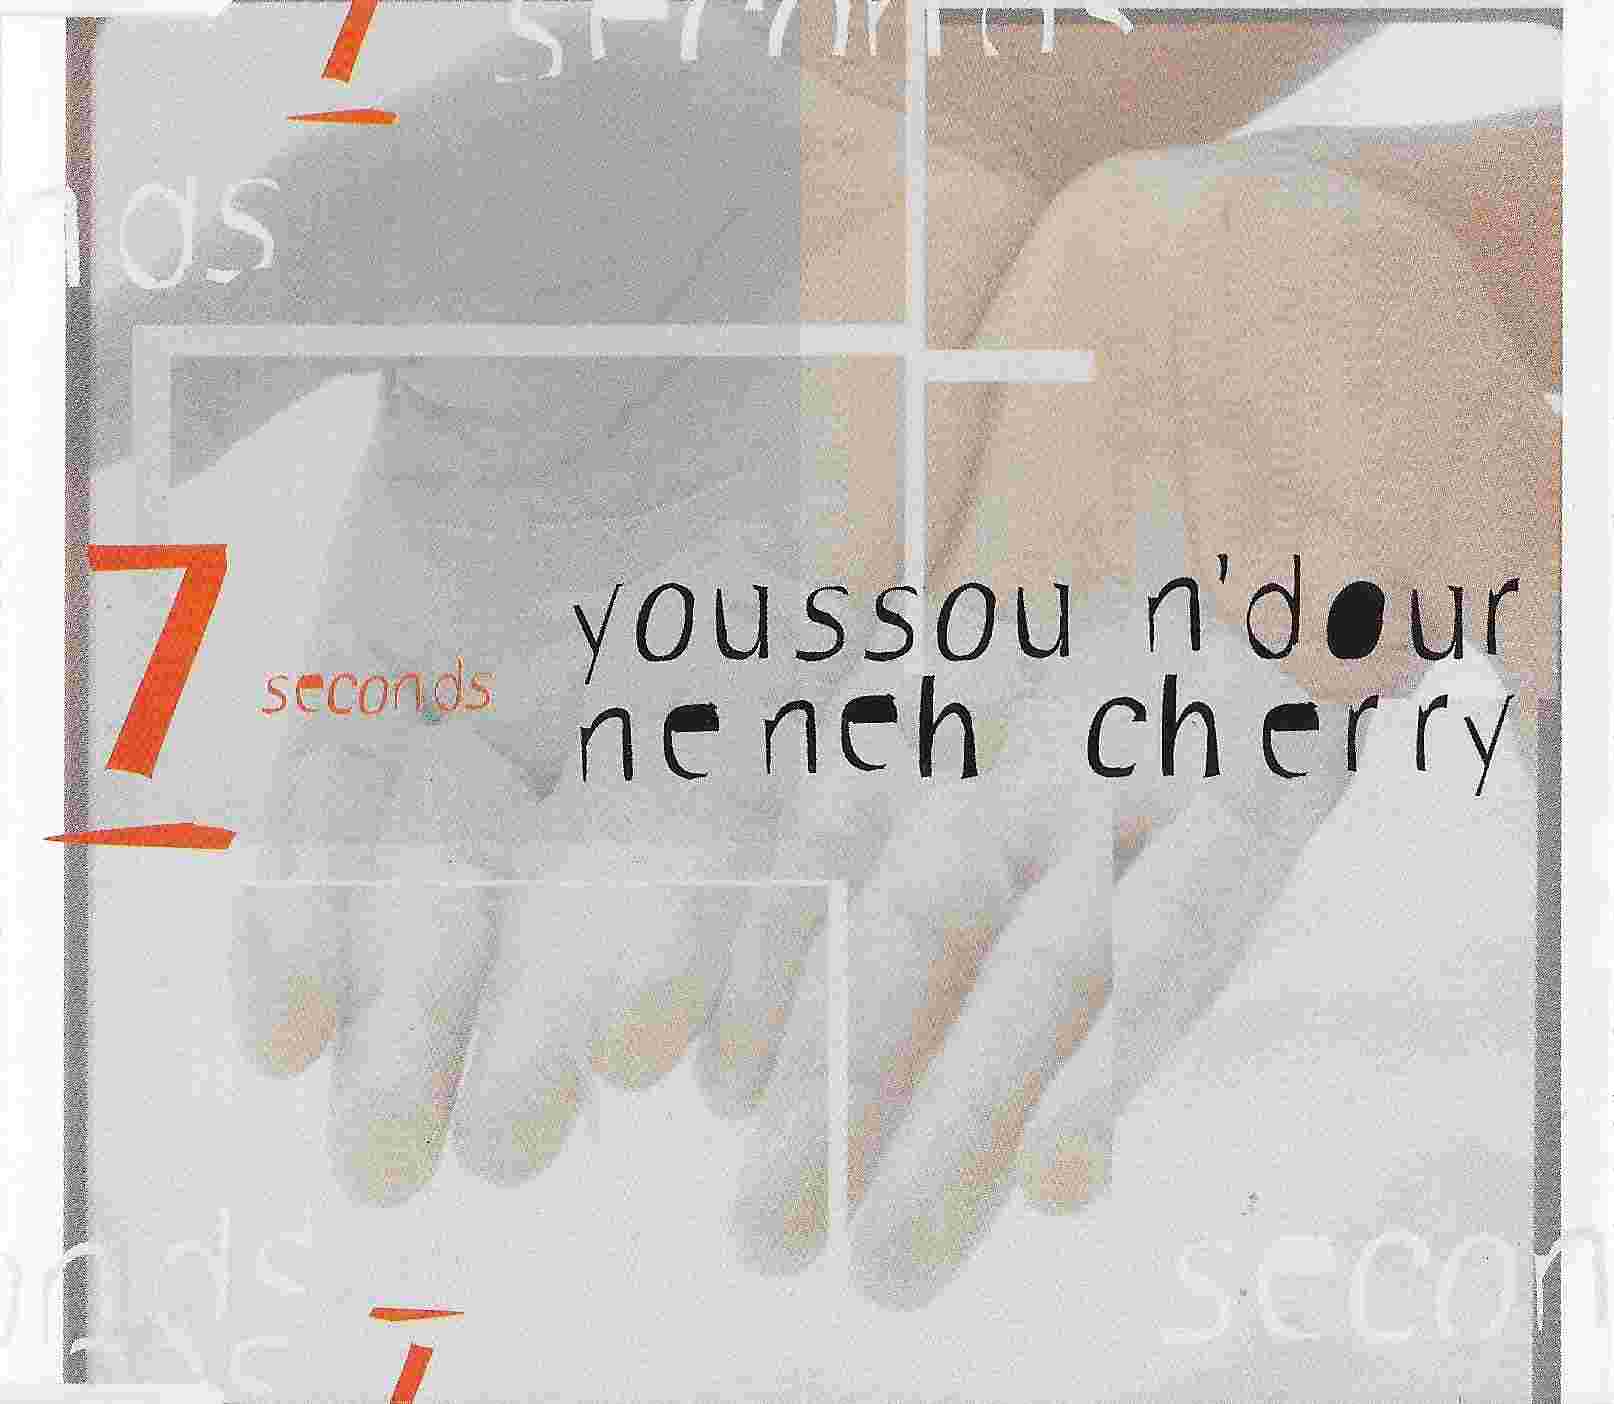 Picture of 7 seconds by artist Youssou D'Dour / Neneh Cherry 